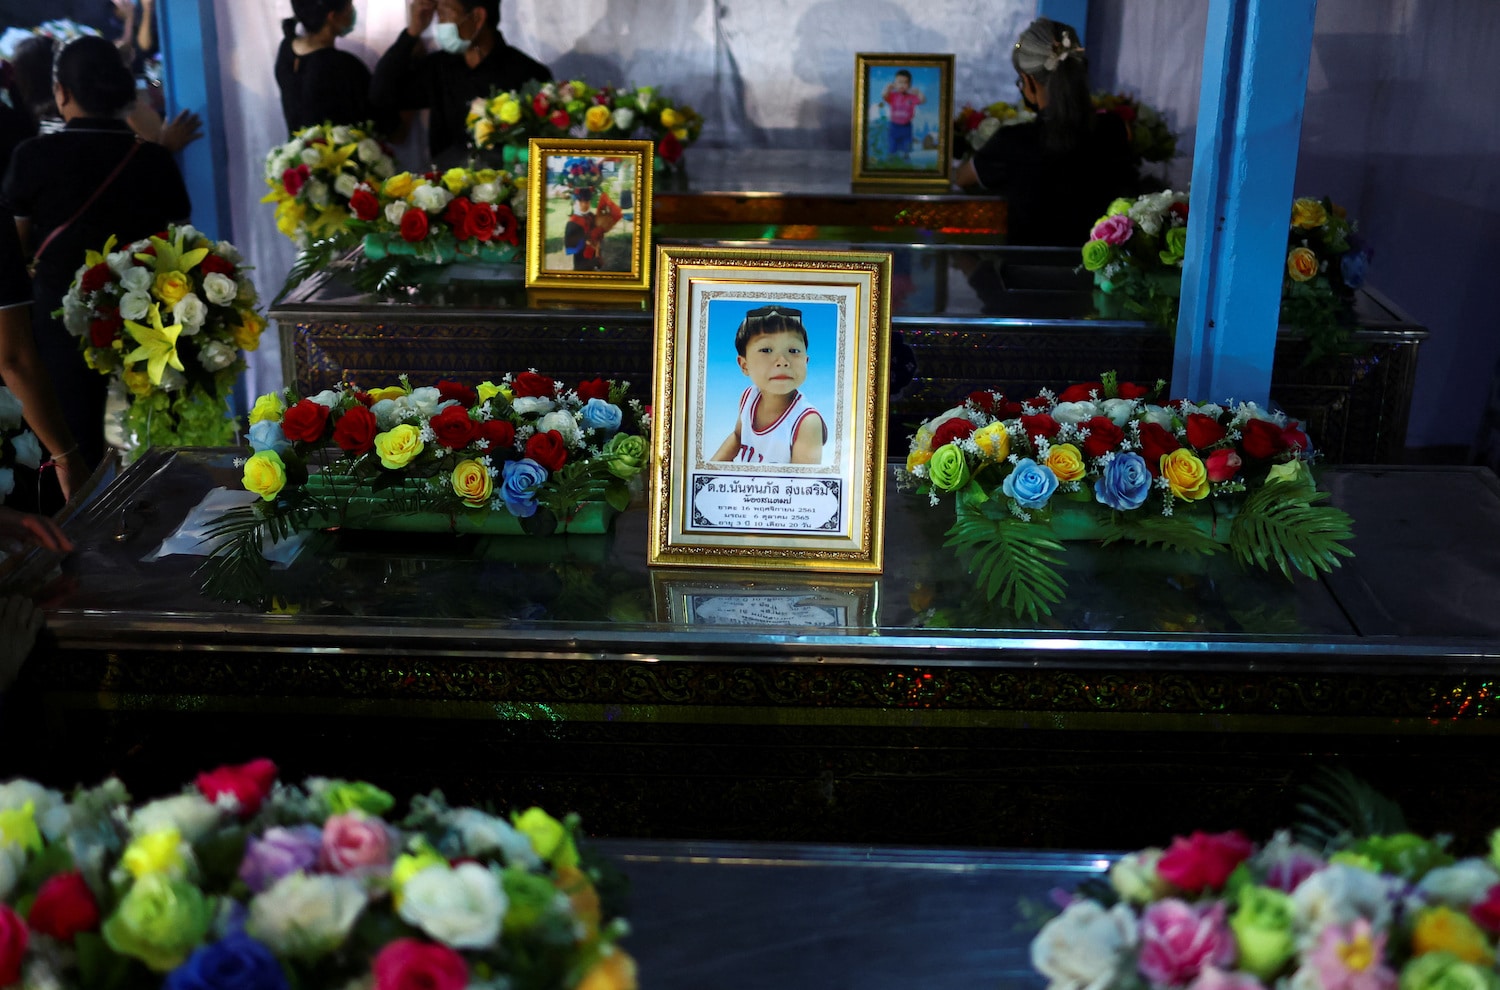 Families in Thailand Began Funeral Rites for the 36 Killed at Daycare